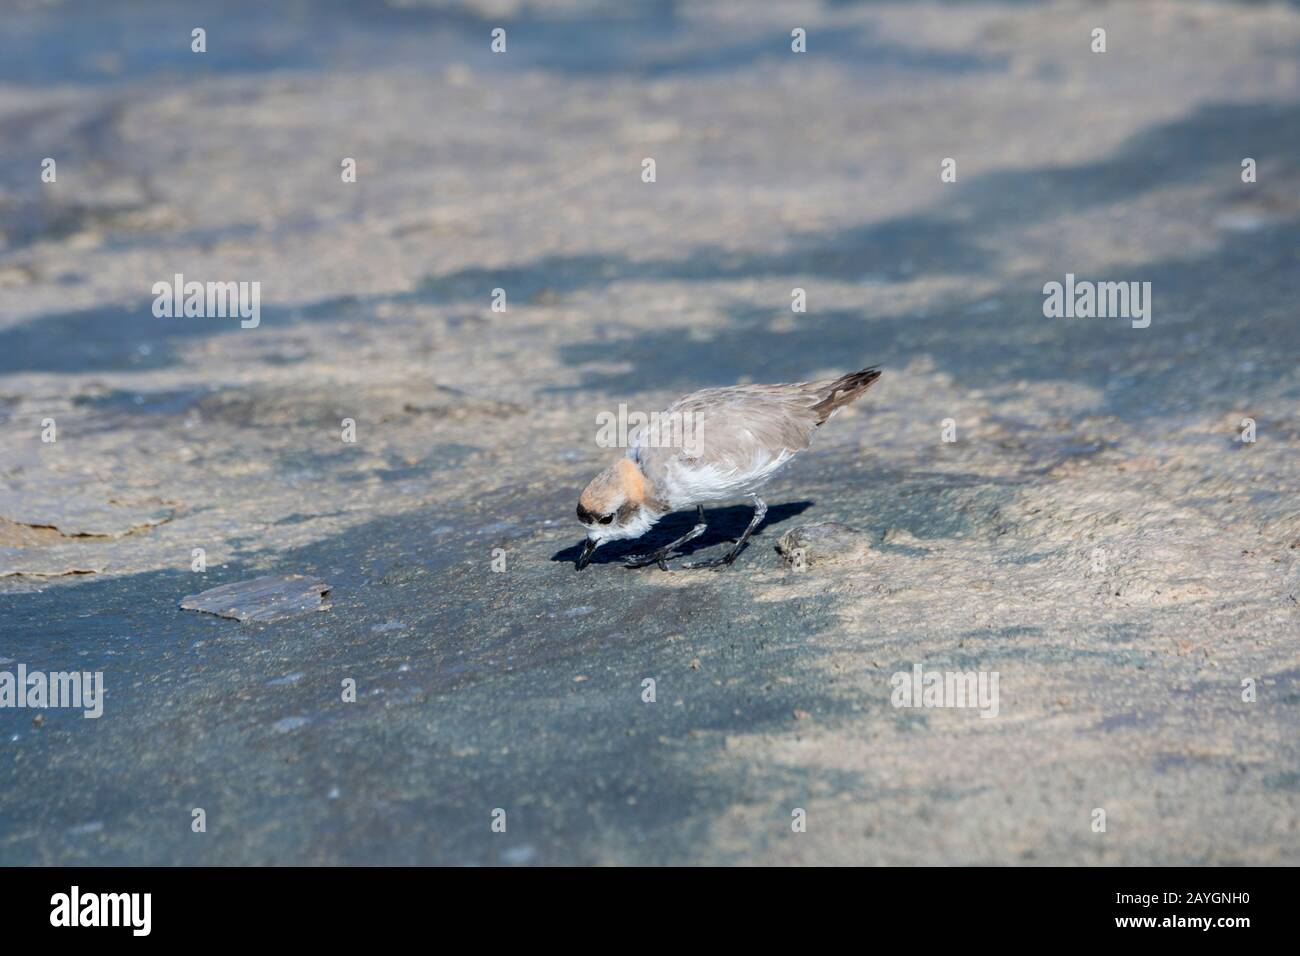 A puna plover (Charadrius alticola) is searching for food in the shallow waters of the Chaxa Lagoon, Soncor section of Los Flamencos National Reserve Stock Photo